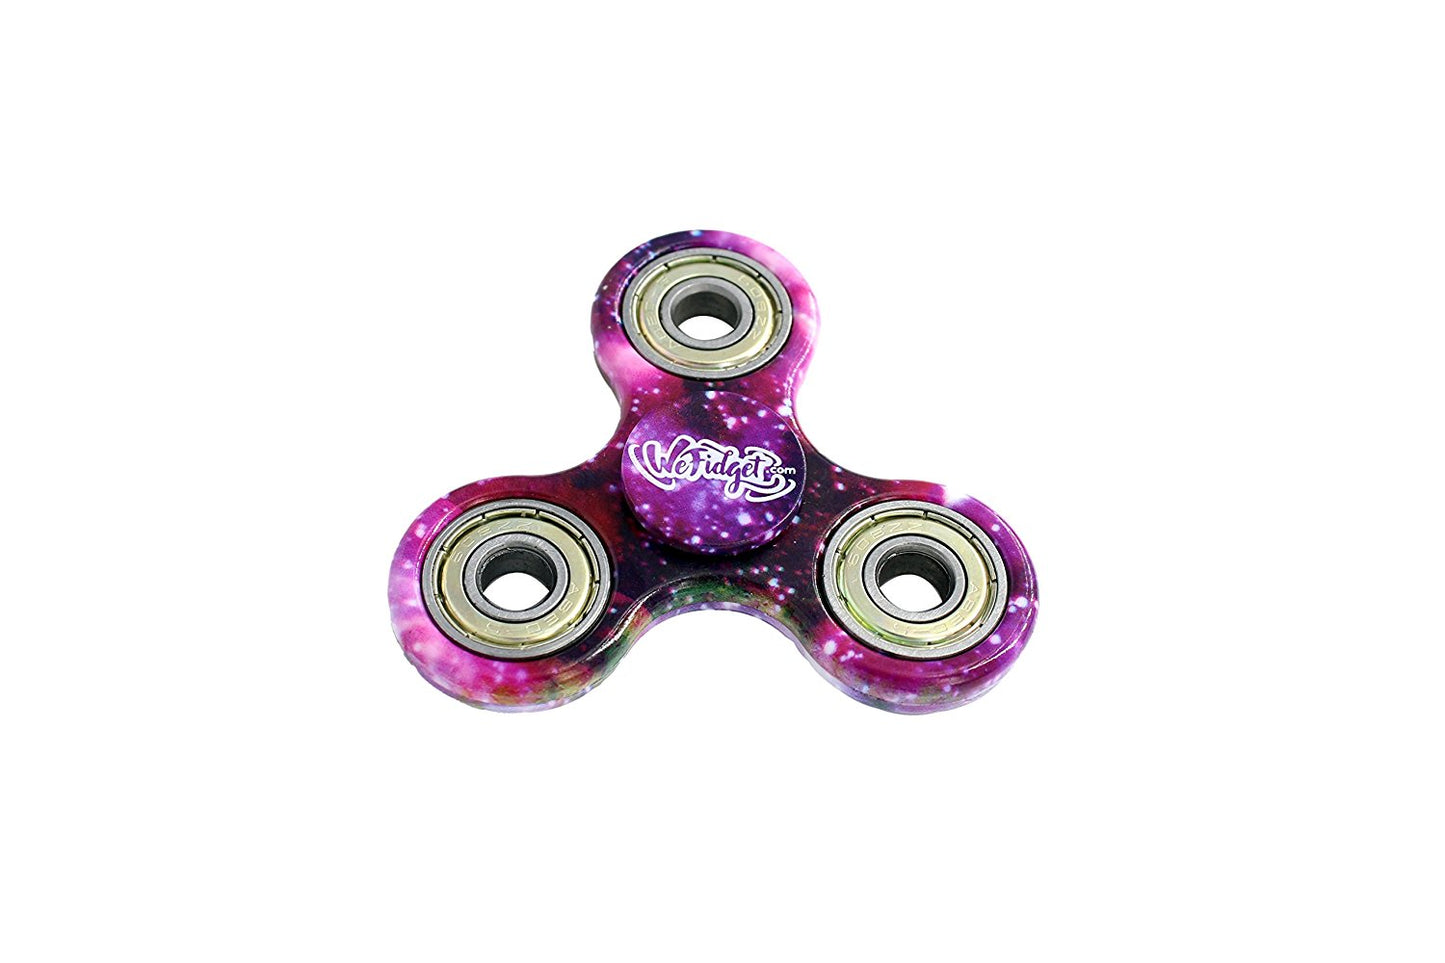 WeFidget's Milky Way New Style Tri-Spinner Fidget Toy with Premium Bearings, Galaxy Themed